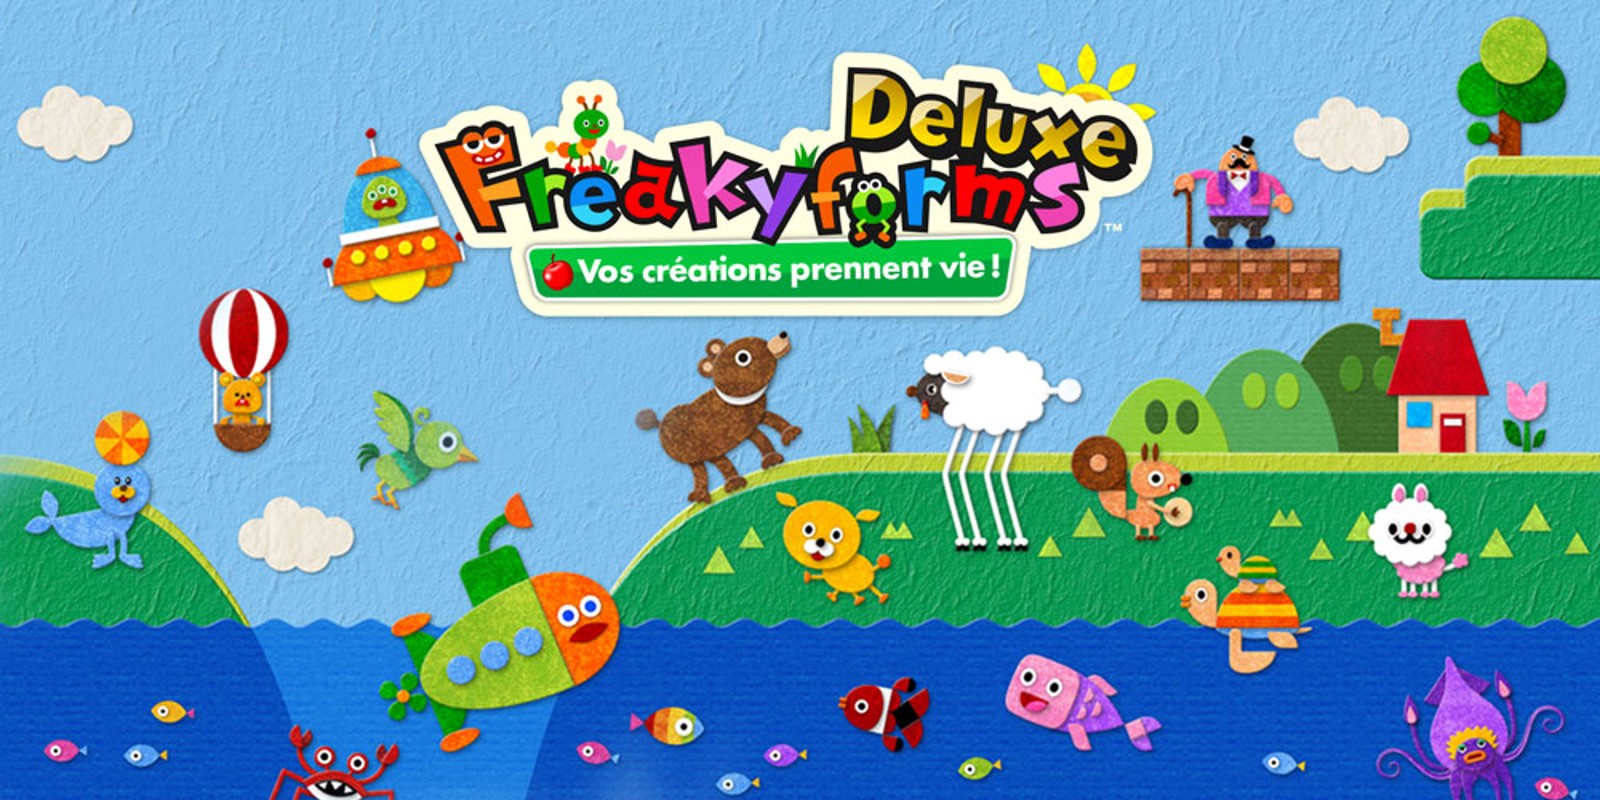 Freakyforms Deluxe : Vos créations prennent vie !